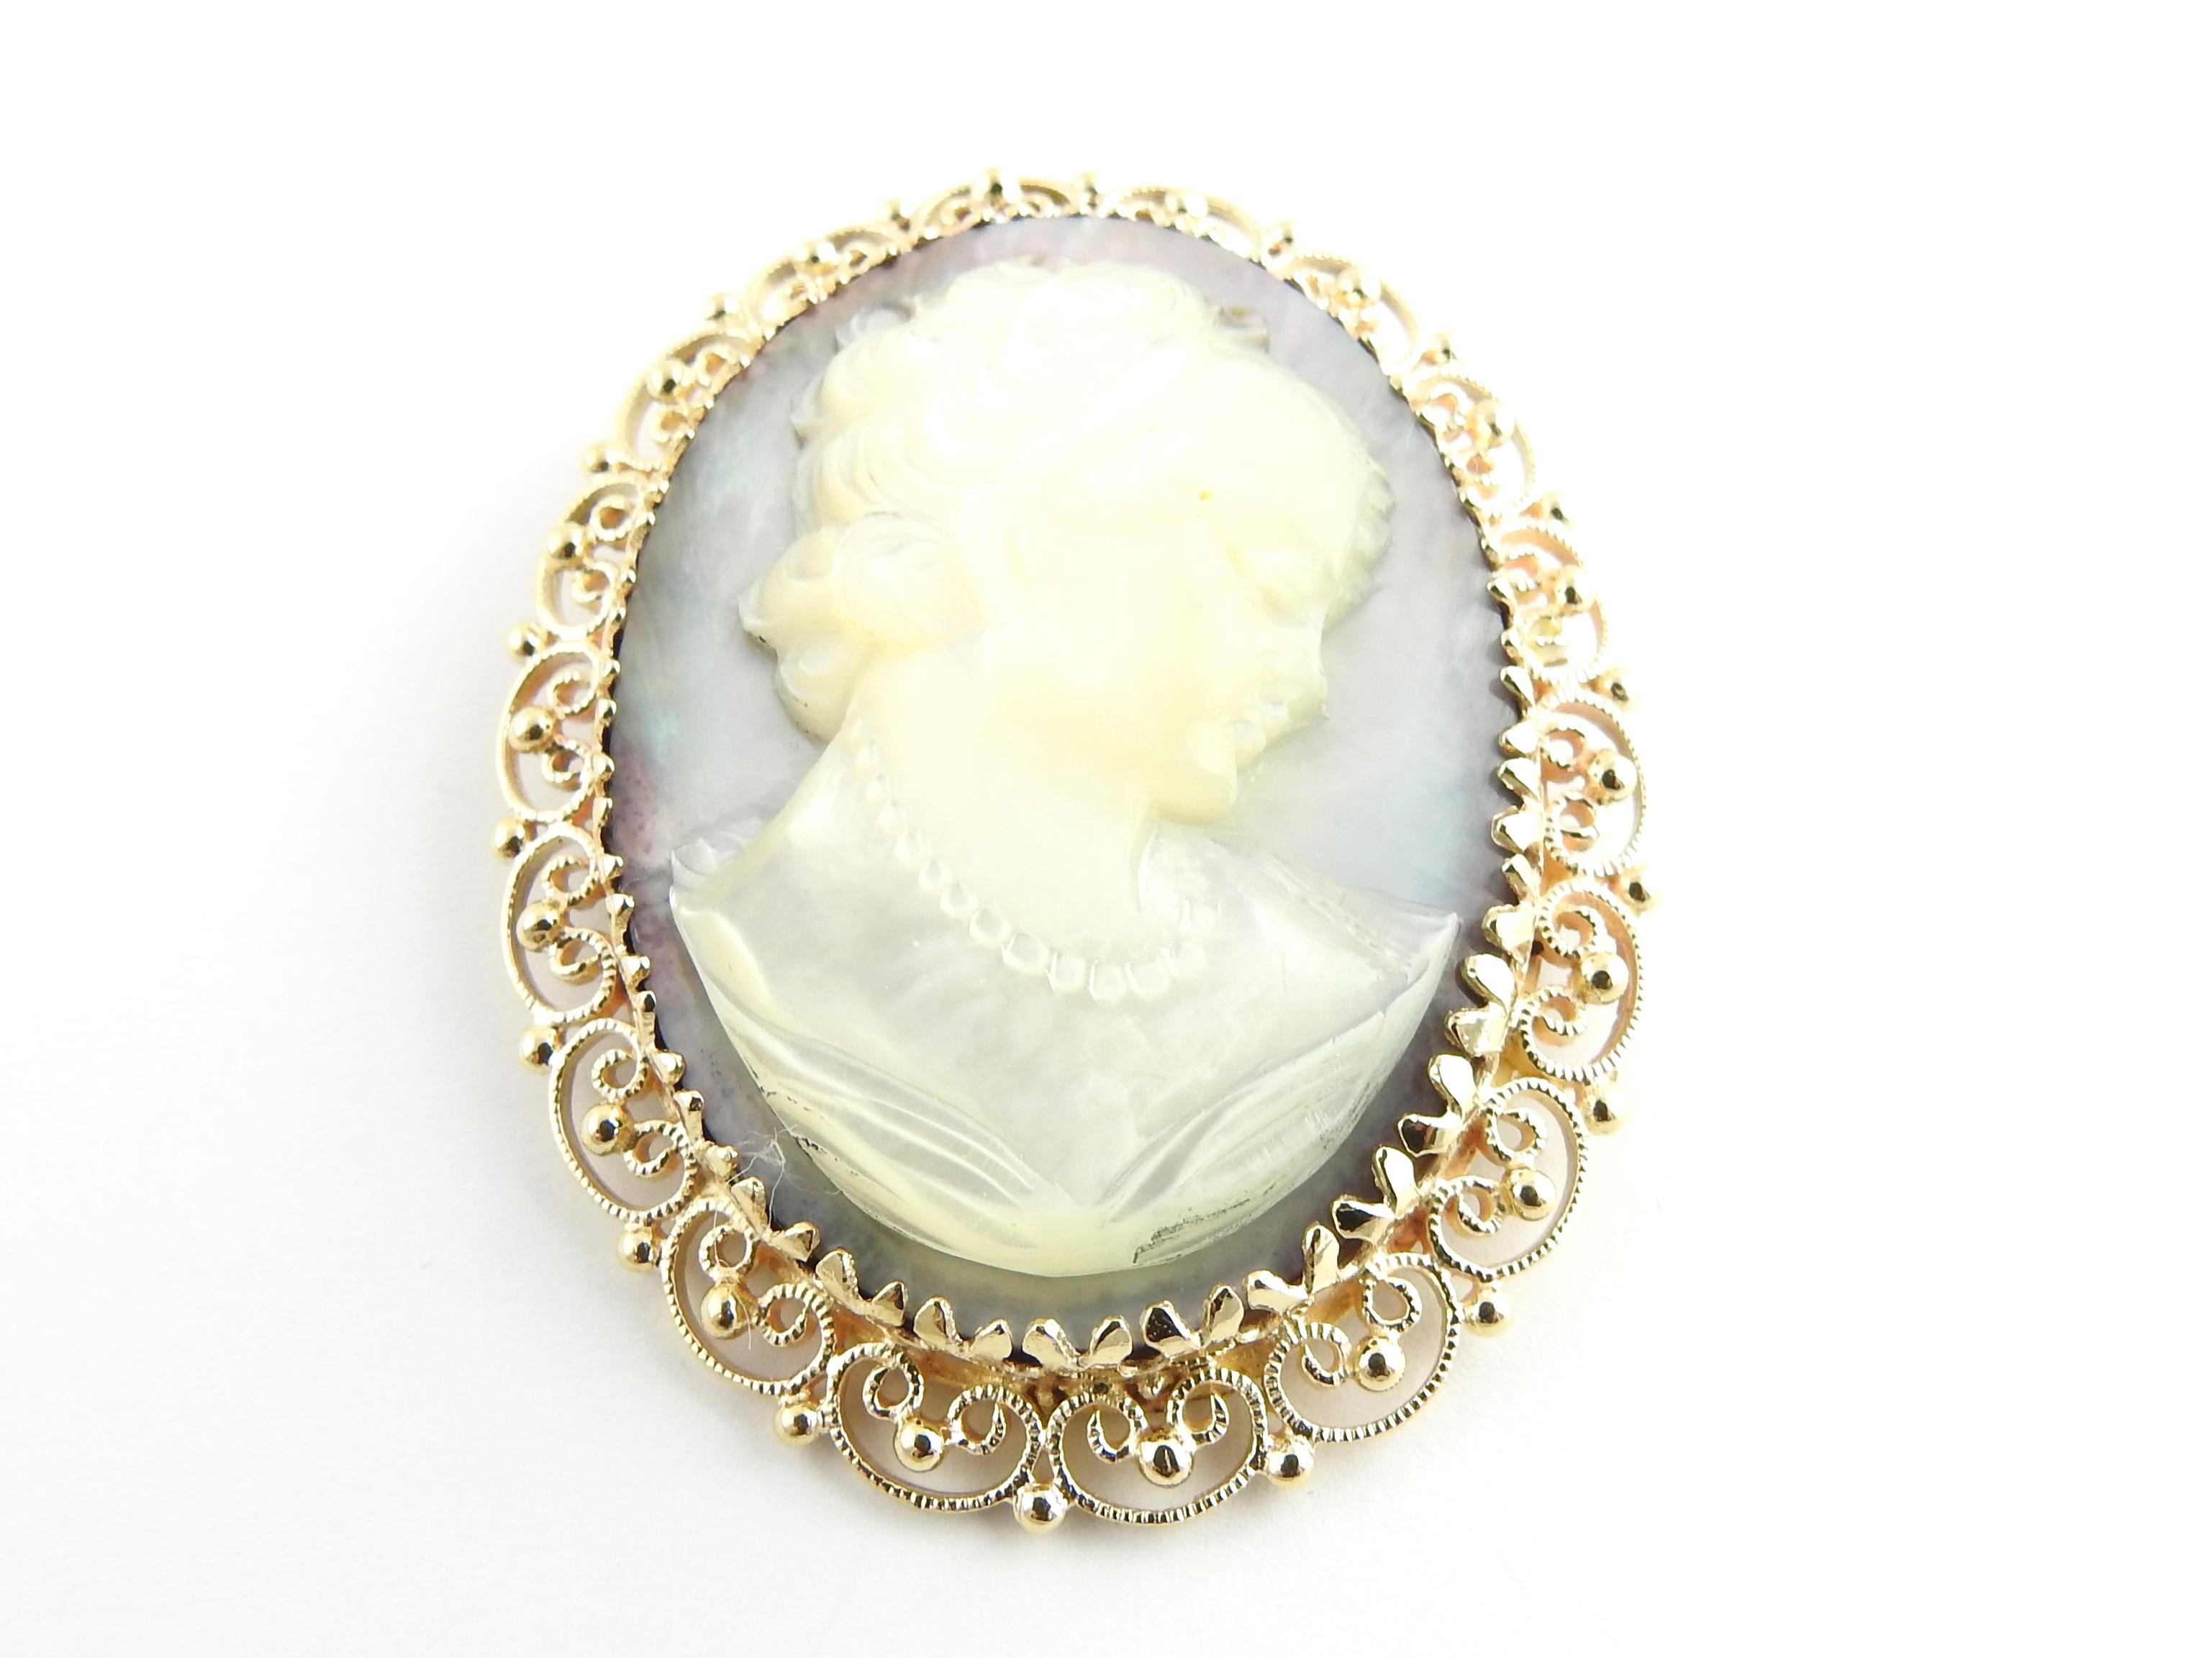 Vintage 14 Karat Yellow Gold Cameo Brooch/Pendant

This lovely mother-of-pearl cameo features a lovely lady in profile framed in beautifully detailed 14K yellow gold. Can be worn as a brooch or a pendant.

Size: 48 mm x38 mm

Weight: 13.5 dwt. /